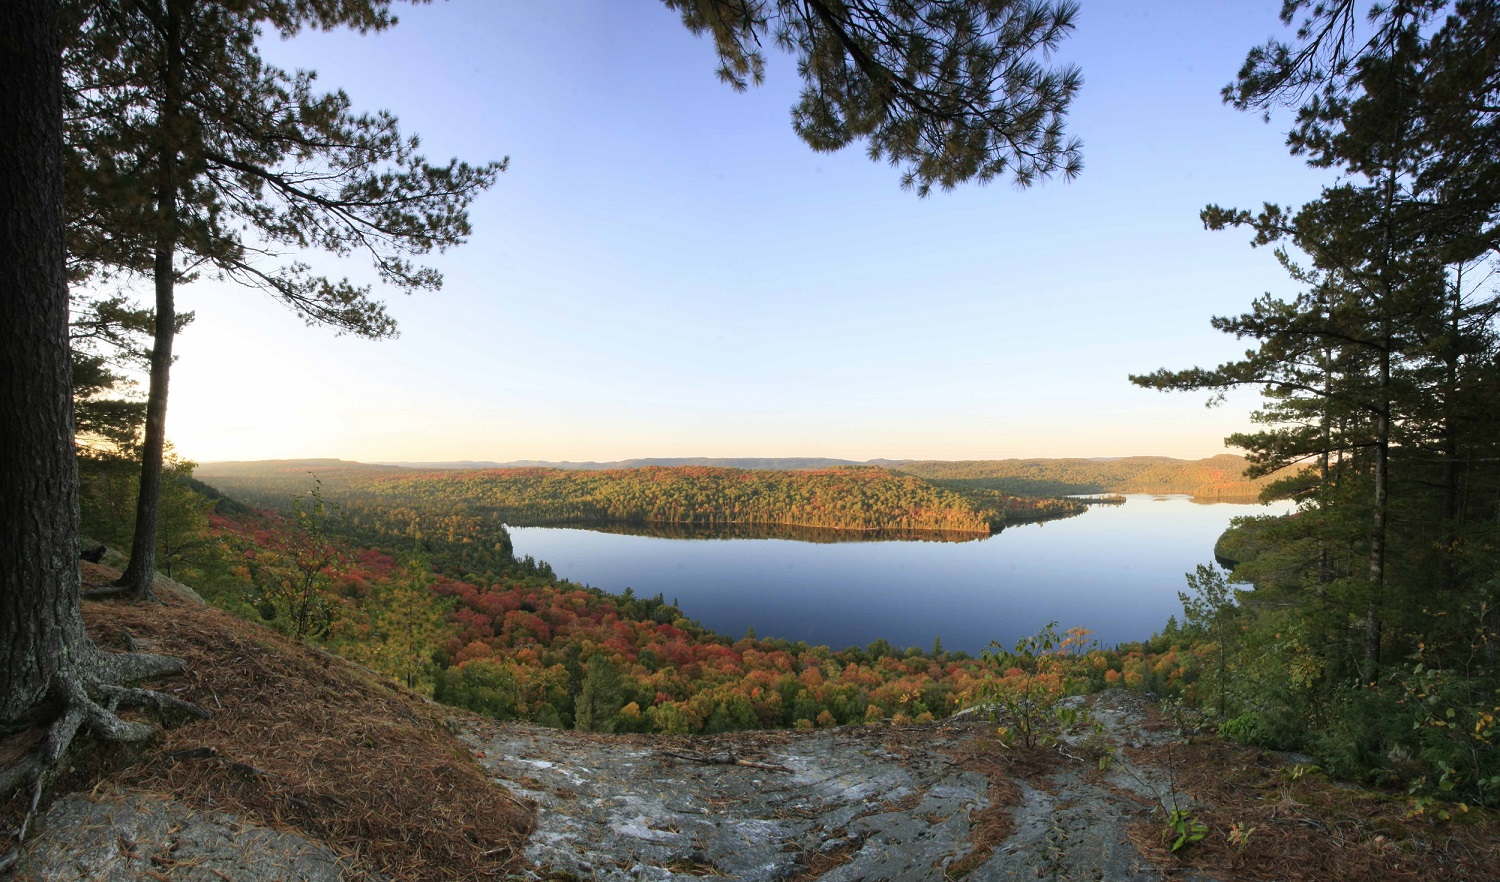 lookout over fall foliage and lake